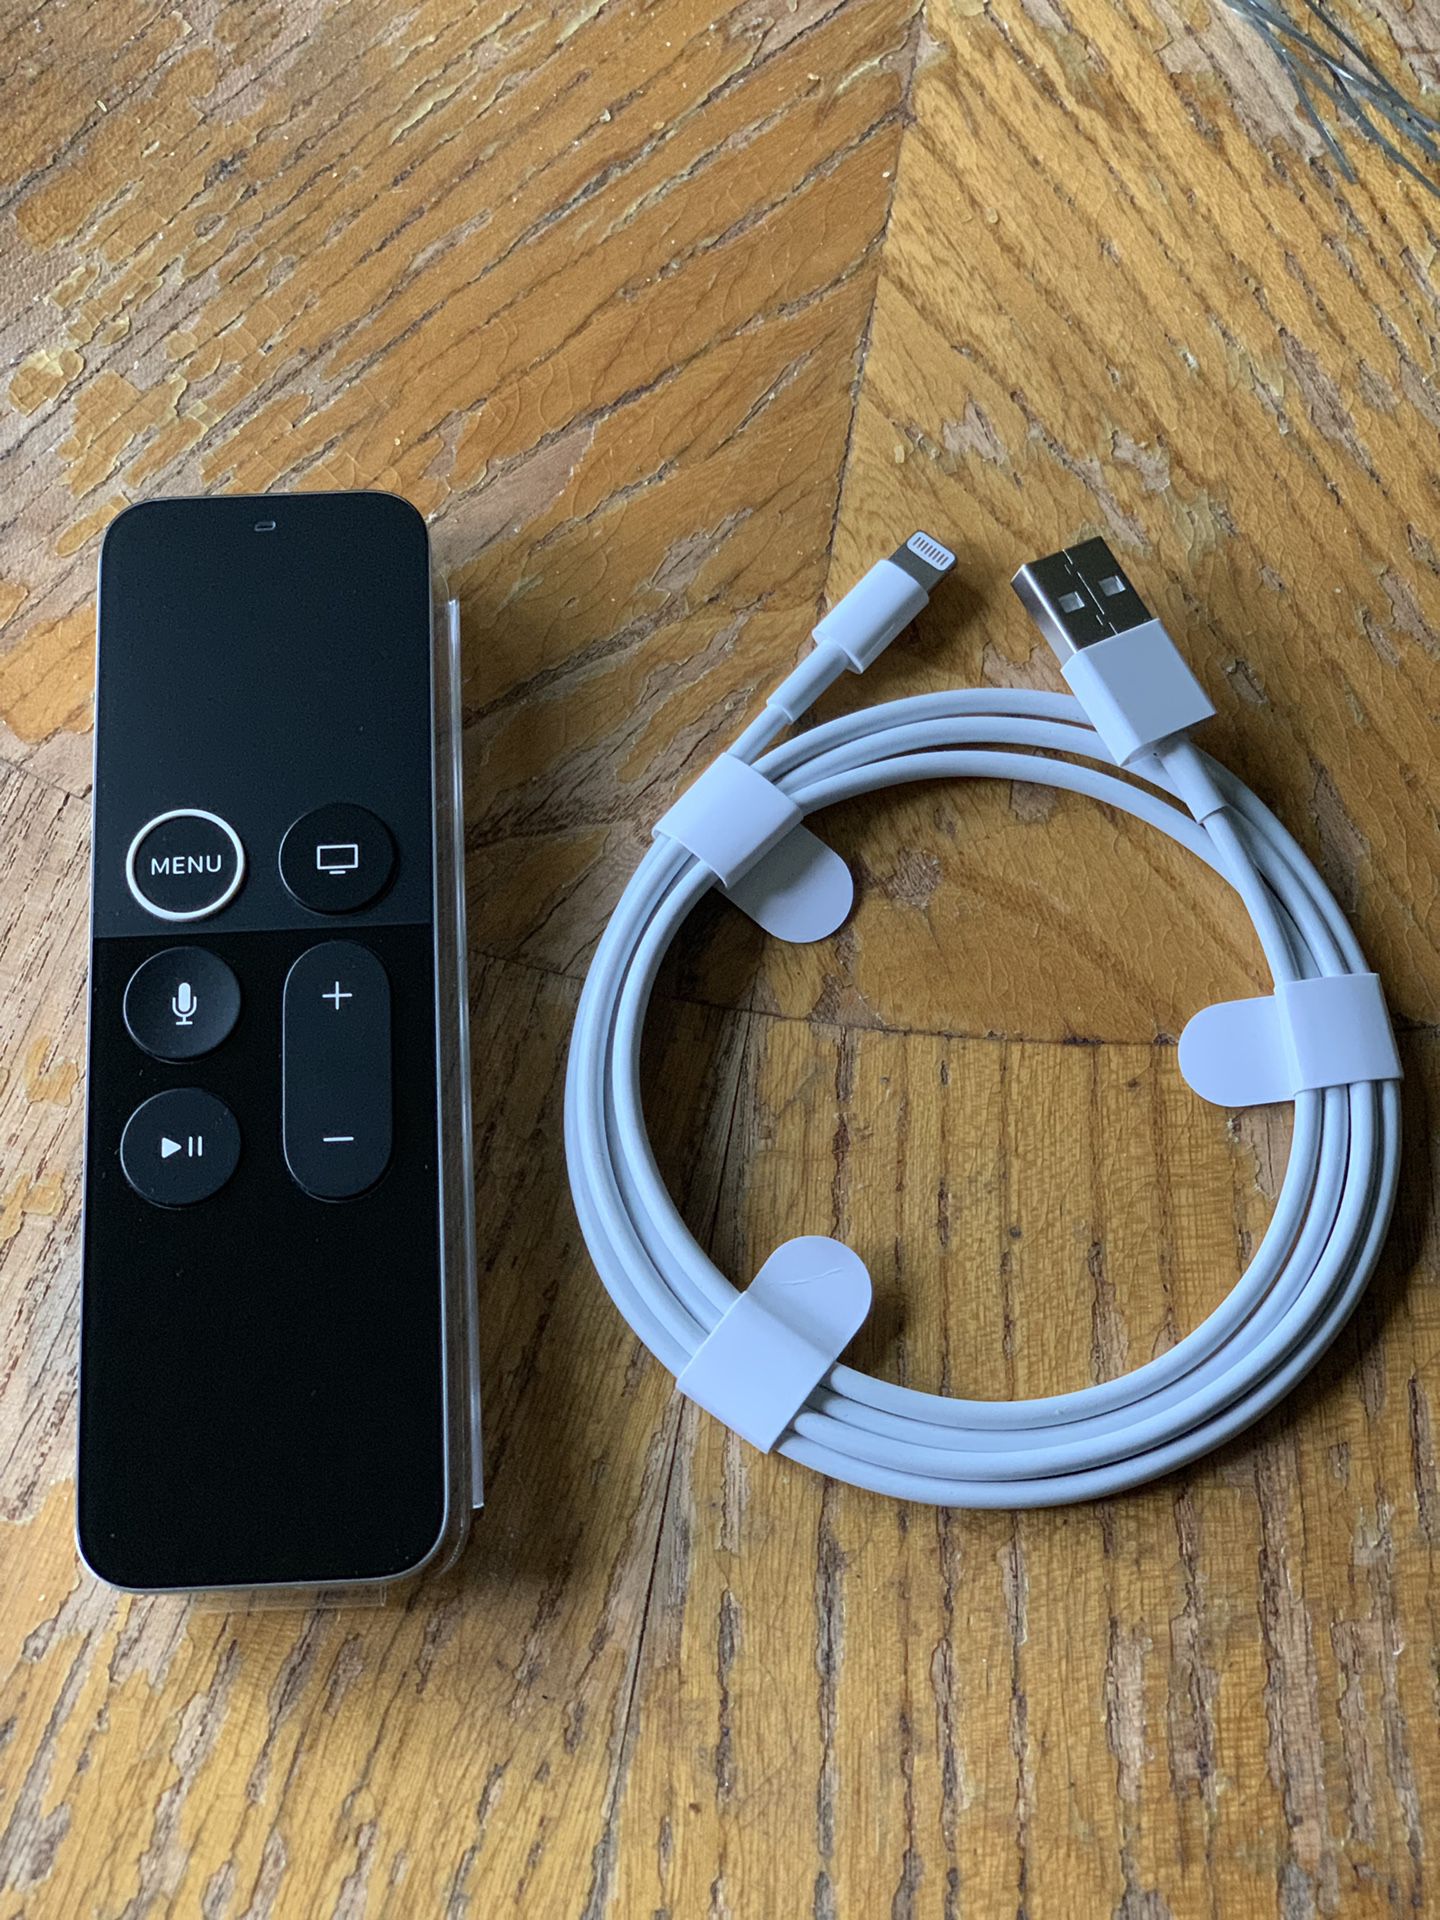 4K APPLE TV SIRI REMOTE. APPLE CHARGING CABLE INCLUDED. BRAND NEW